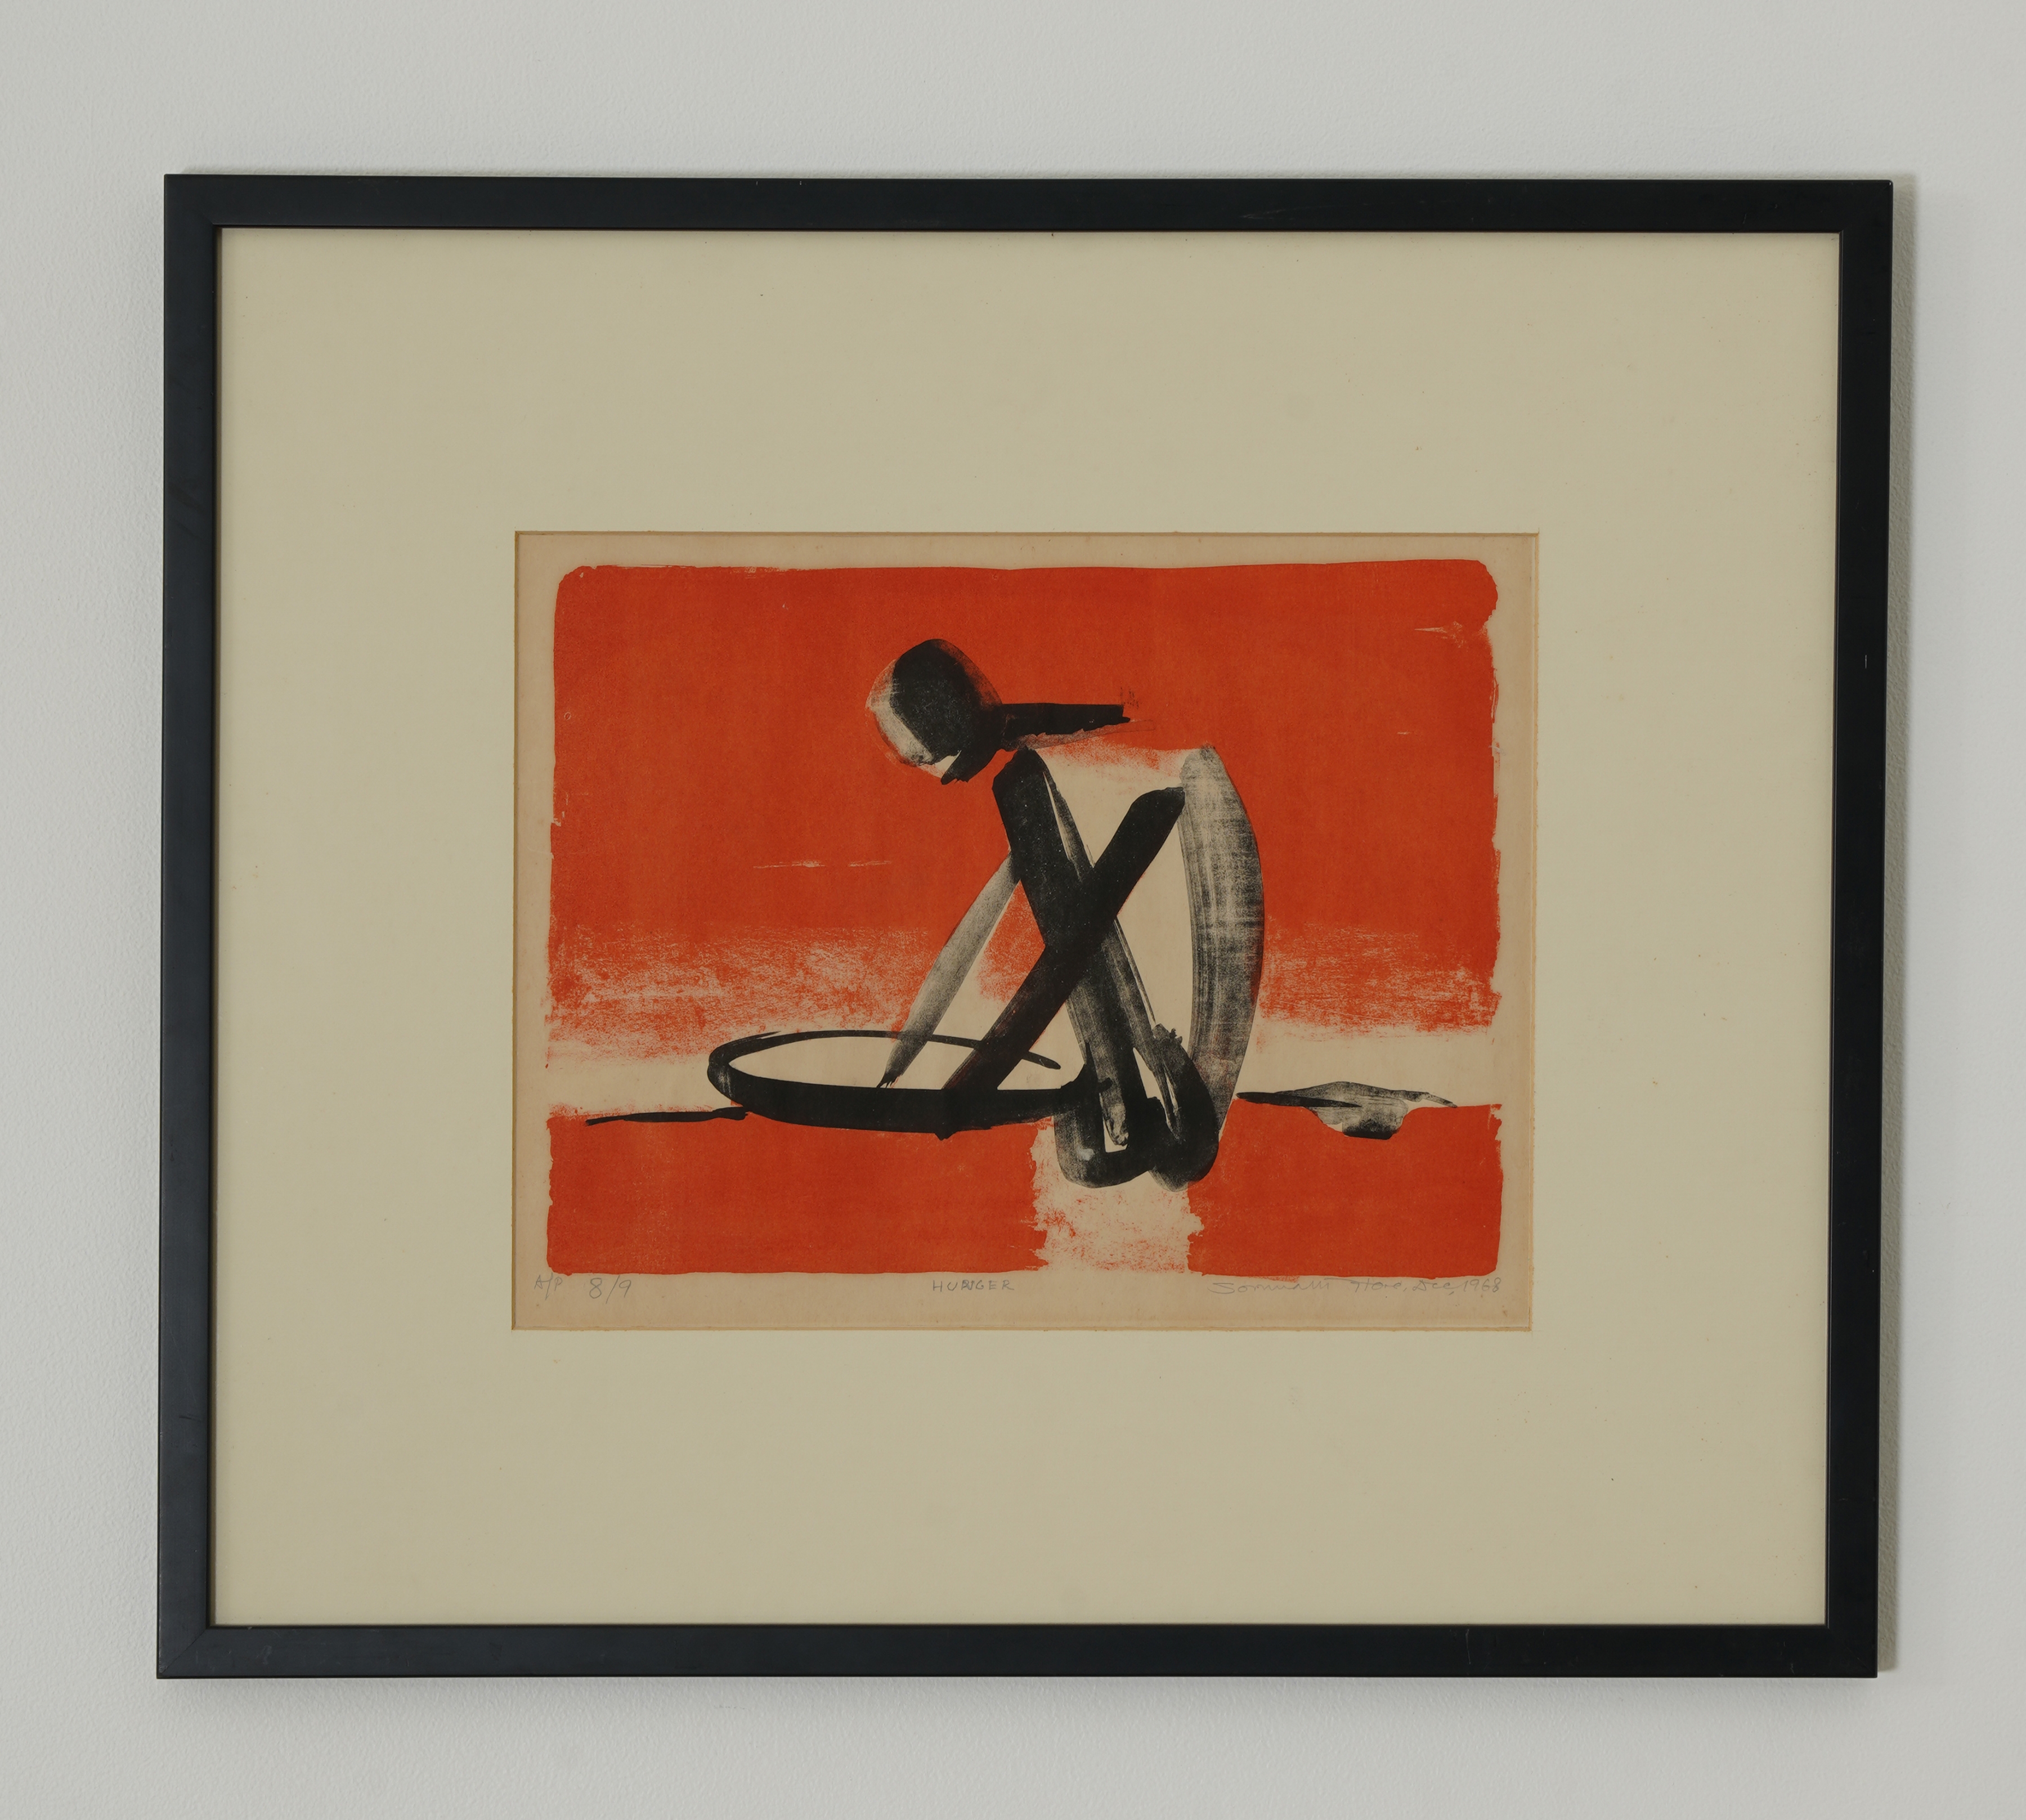 SOMNATH HORE

Hunger, 1968

Lithograph

11.8 x 14.1 in / 30 x 36 cm

&amp;nbsp;